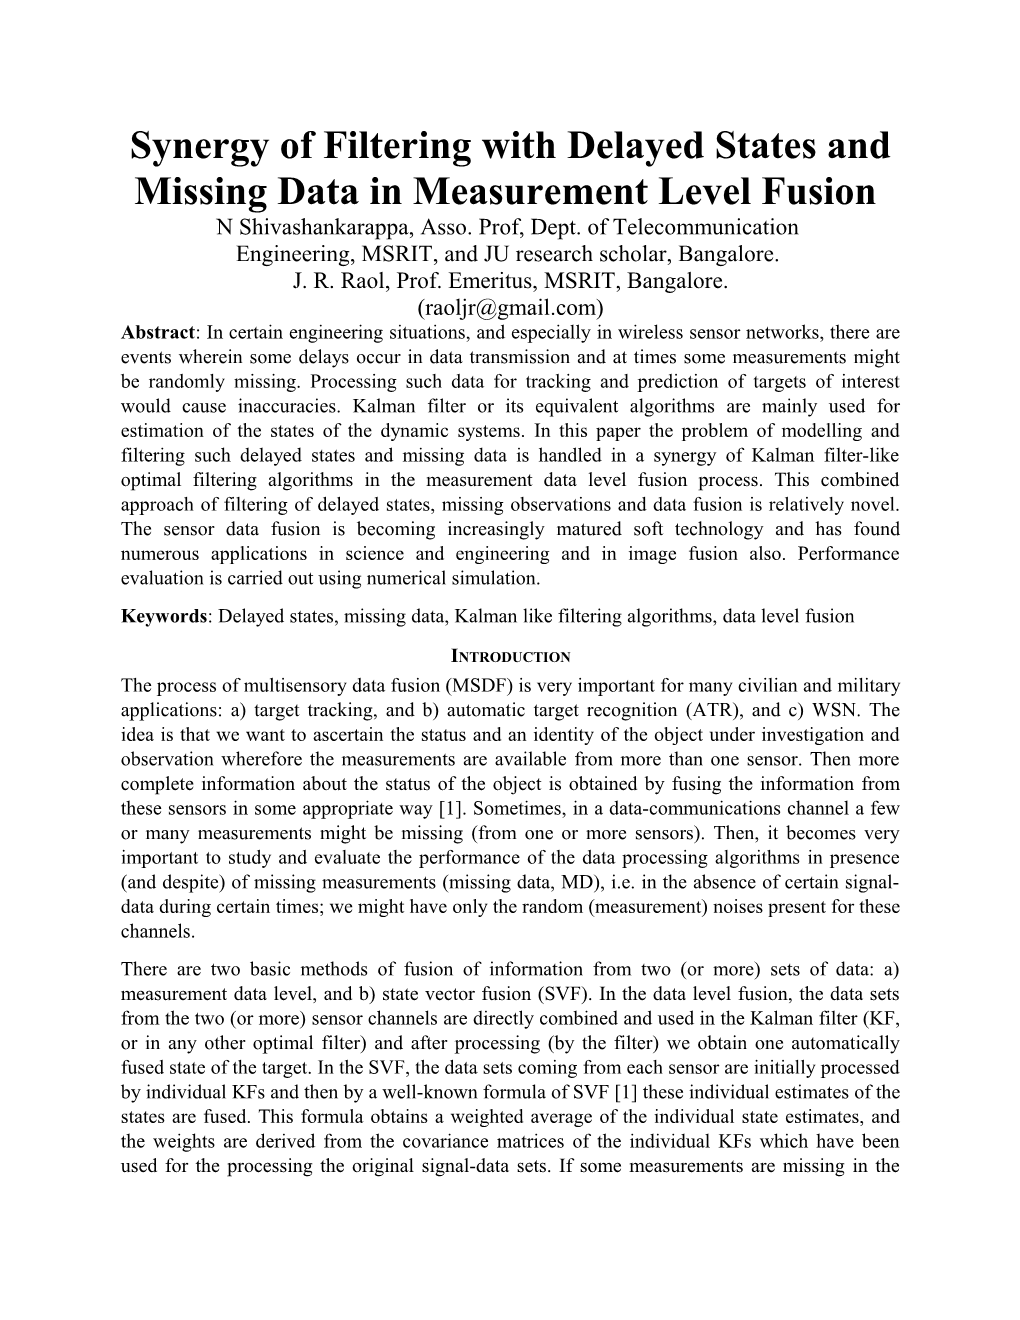 Synergy of Filtering with Delayed States and Missing Data in Measurement Level Fusion